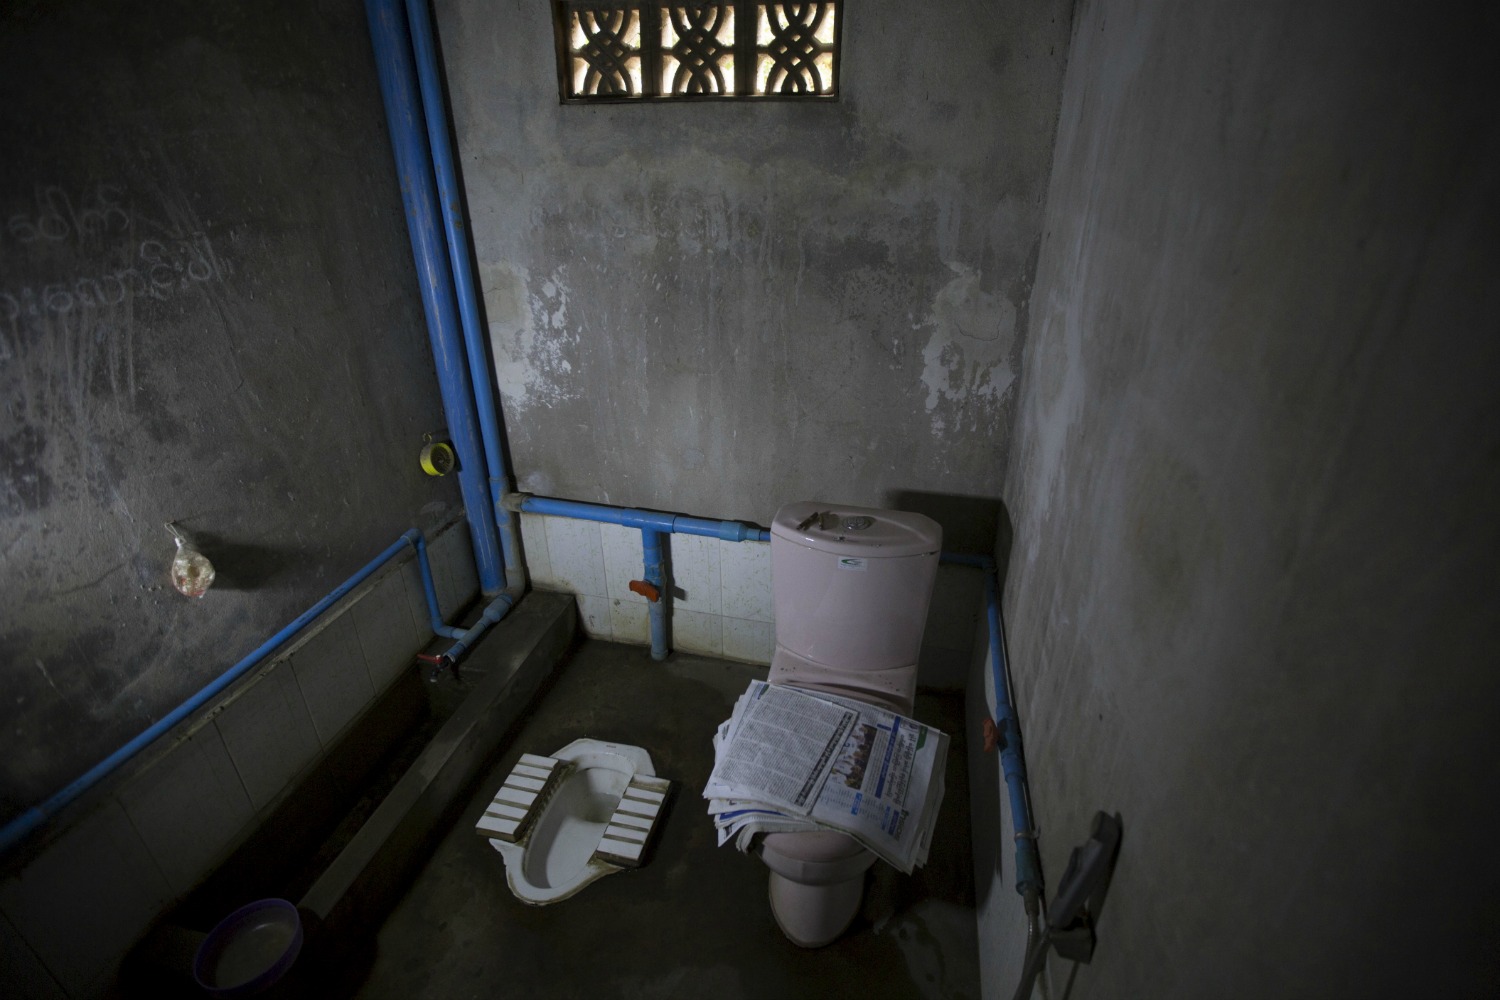 1 in 3 people in the world do not have access to a toilet